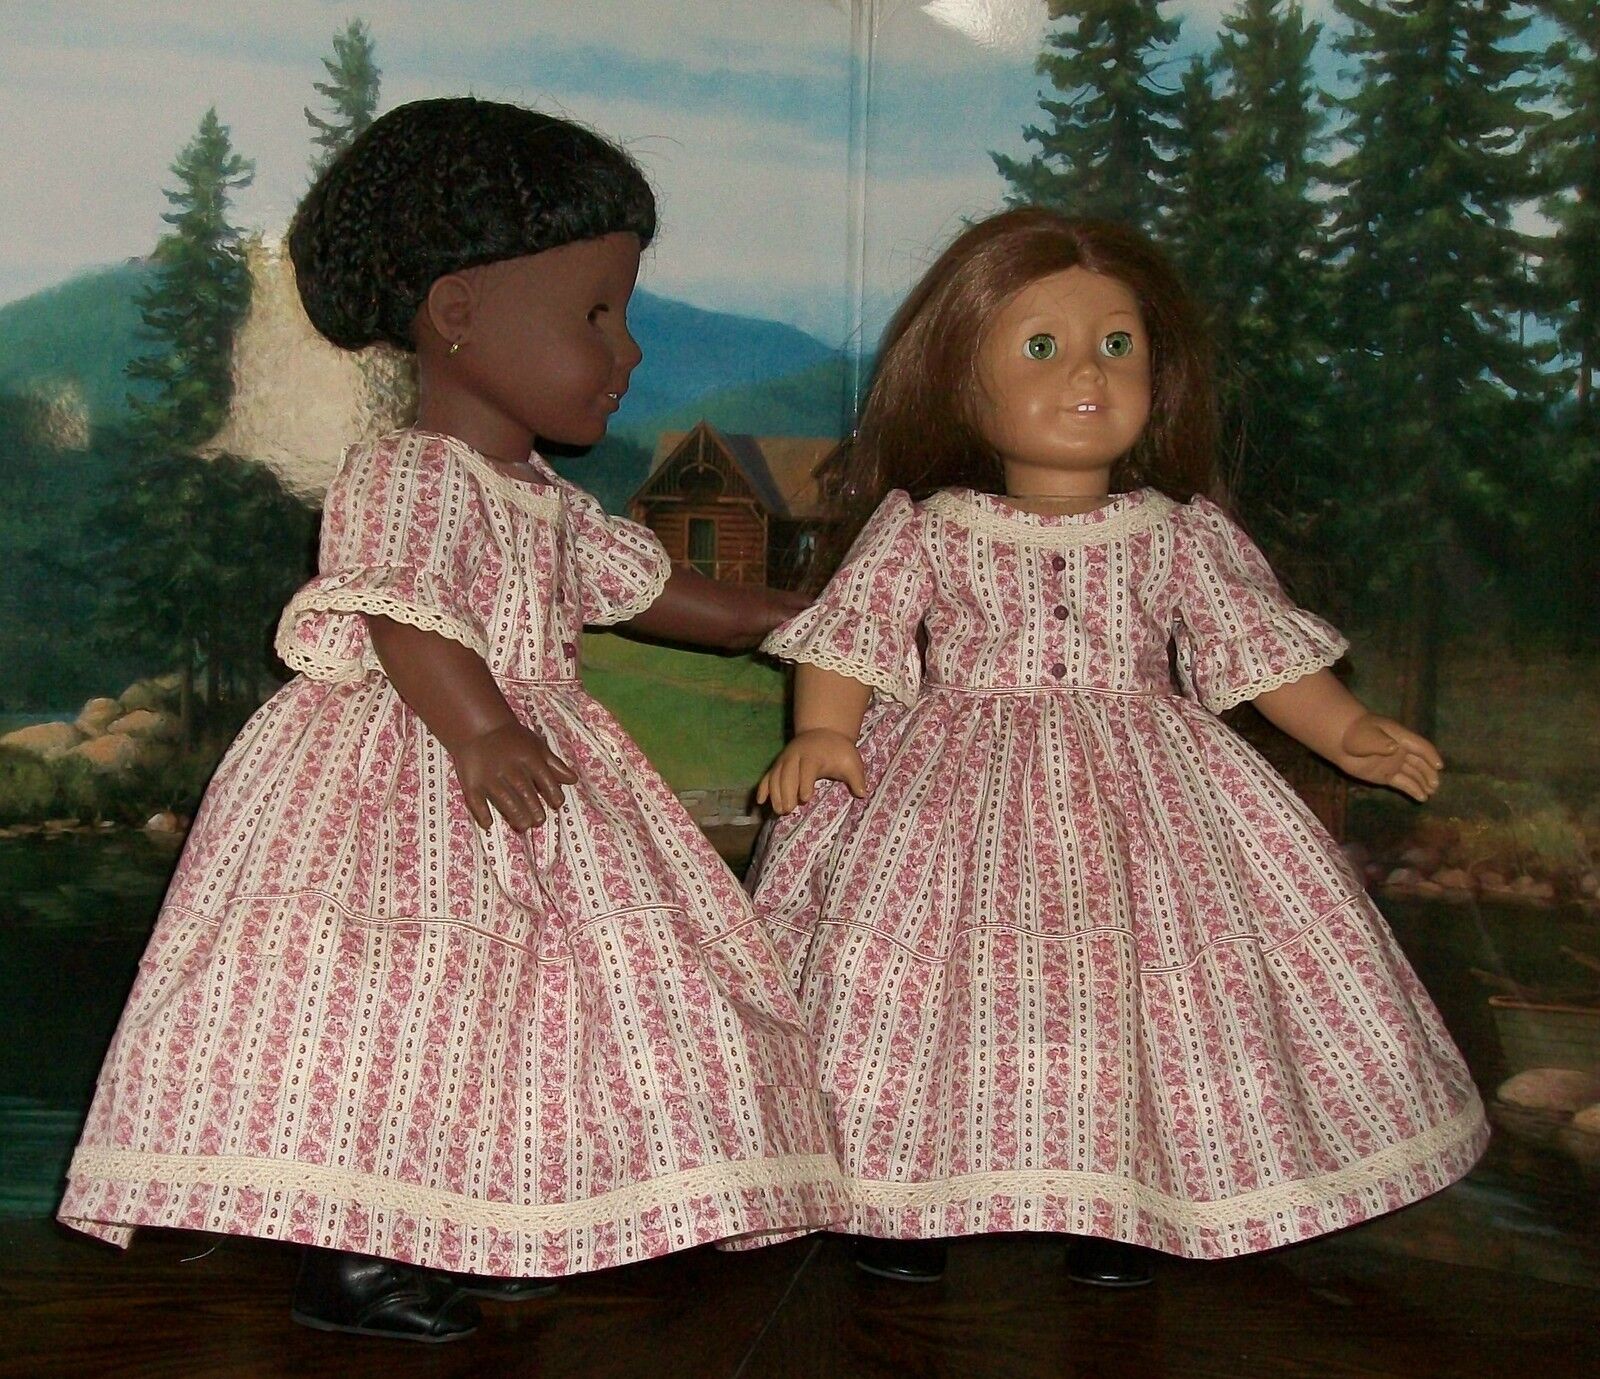  American Girl Doll-1850 Southern Bell Dress with Petticoat-Marie Grace or Cecil